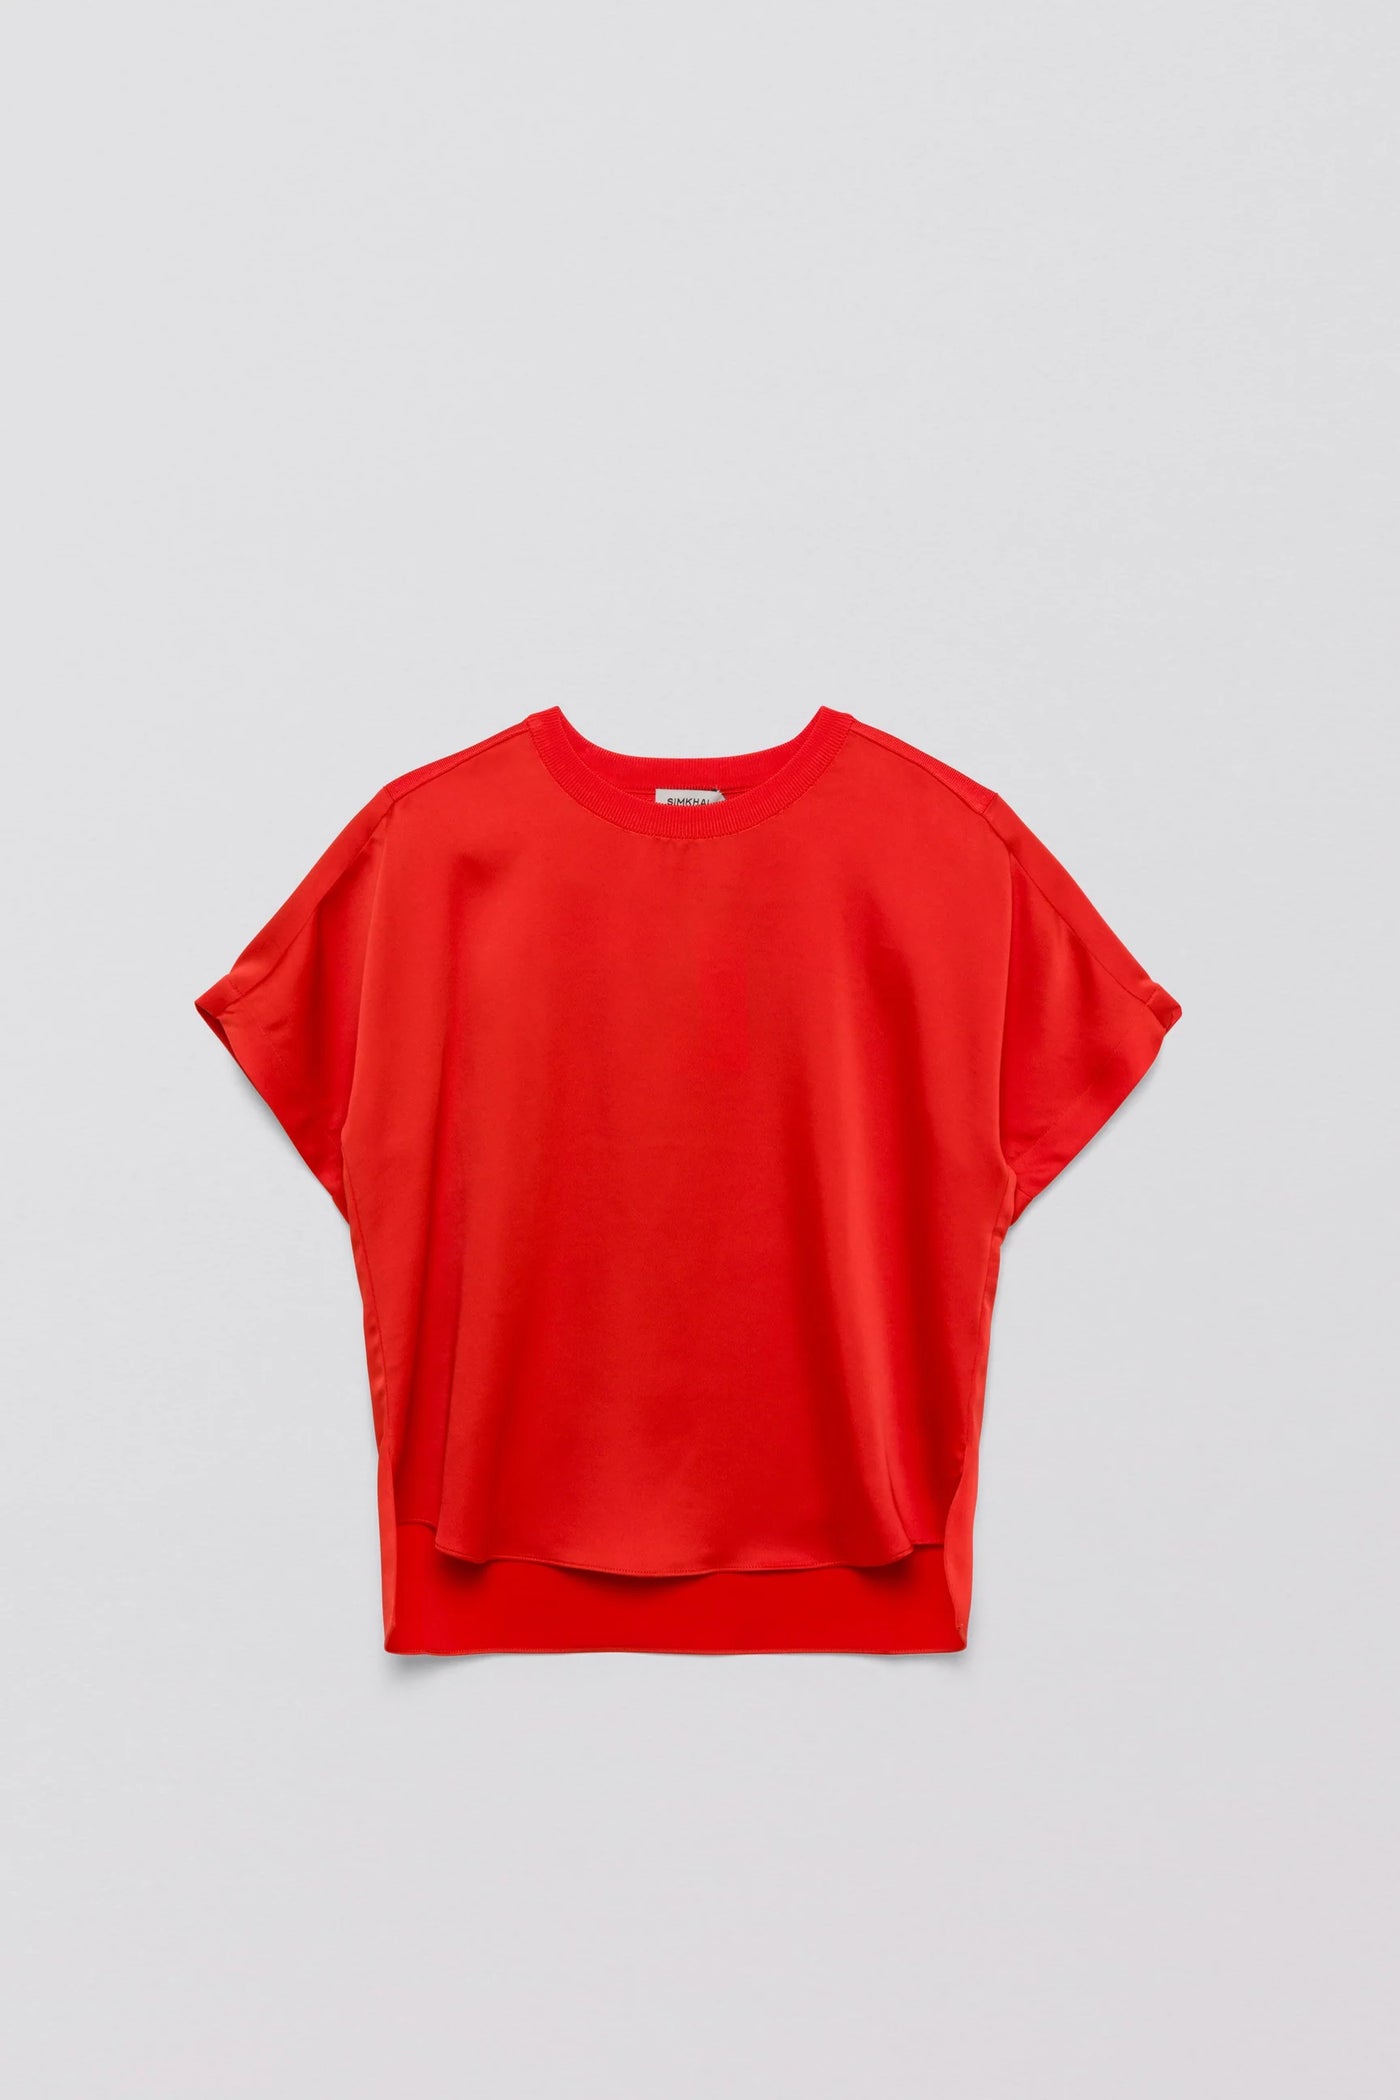 ADDY KNIT BACK T-SHIRT - Flame